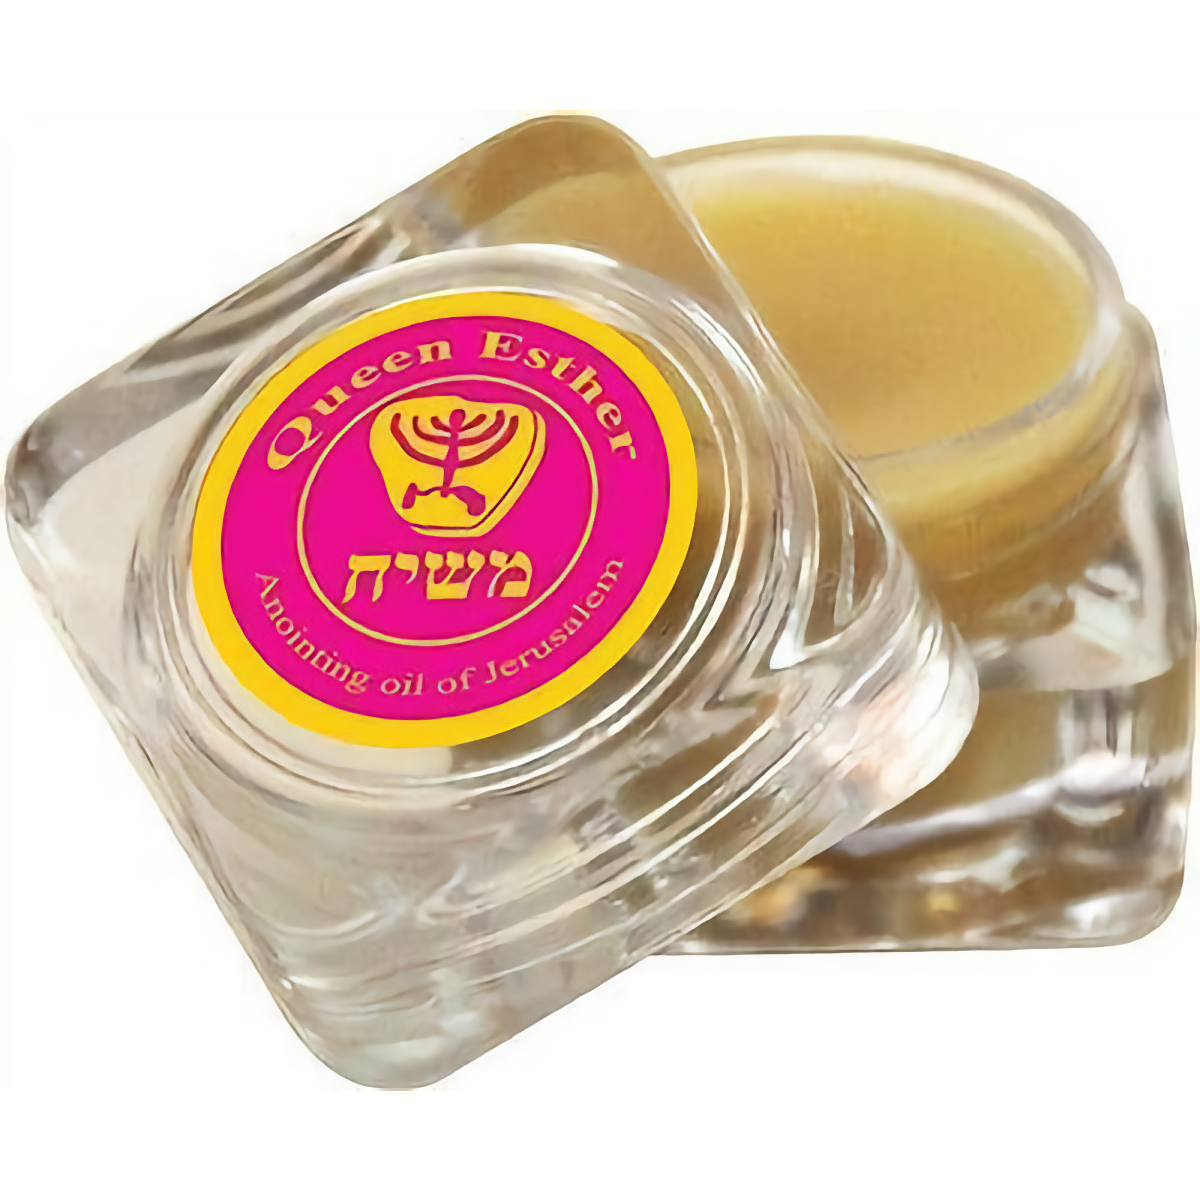 Queen Esther Healing Anointing Balm 5 ml. Made in Israel